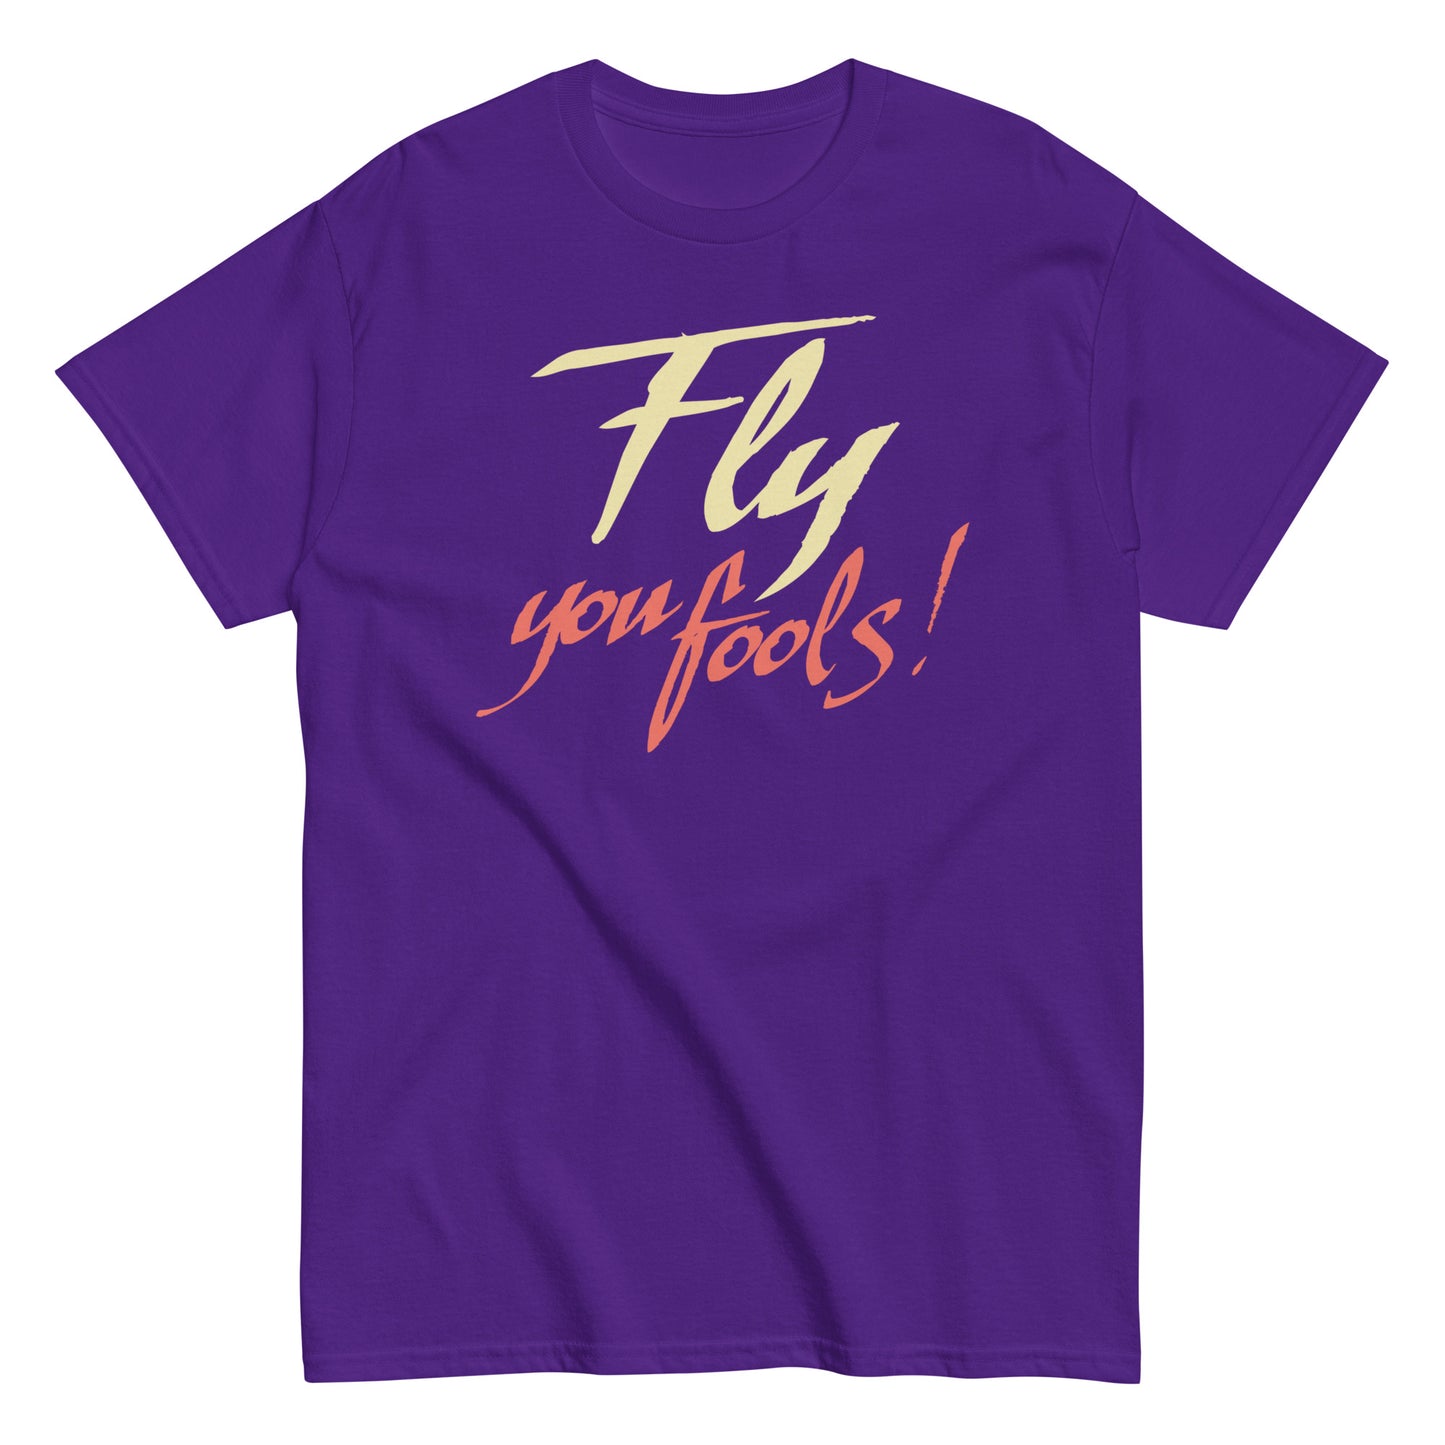 Fly You Fools! Men's Classic Tee